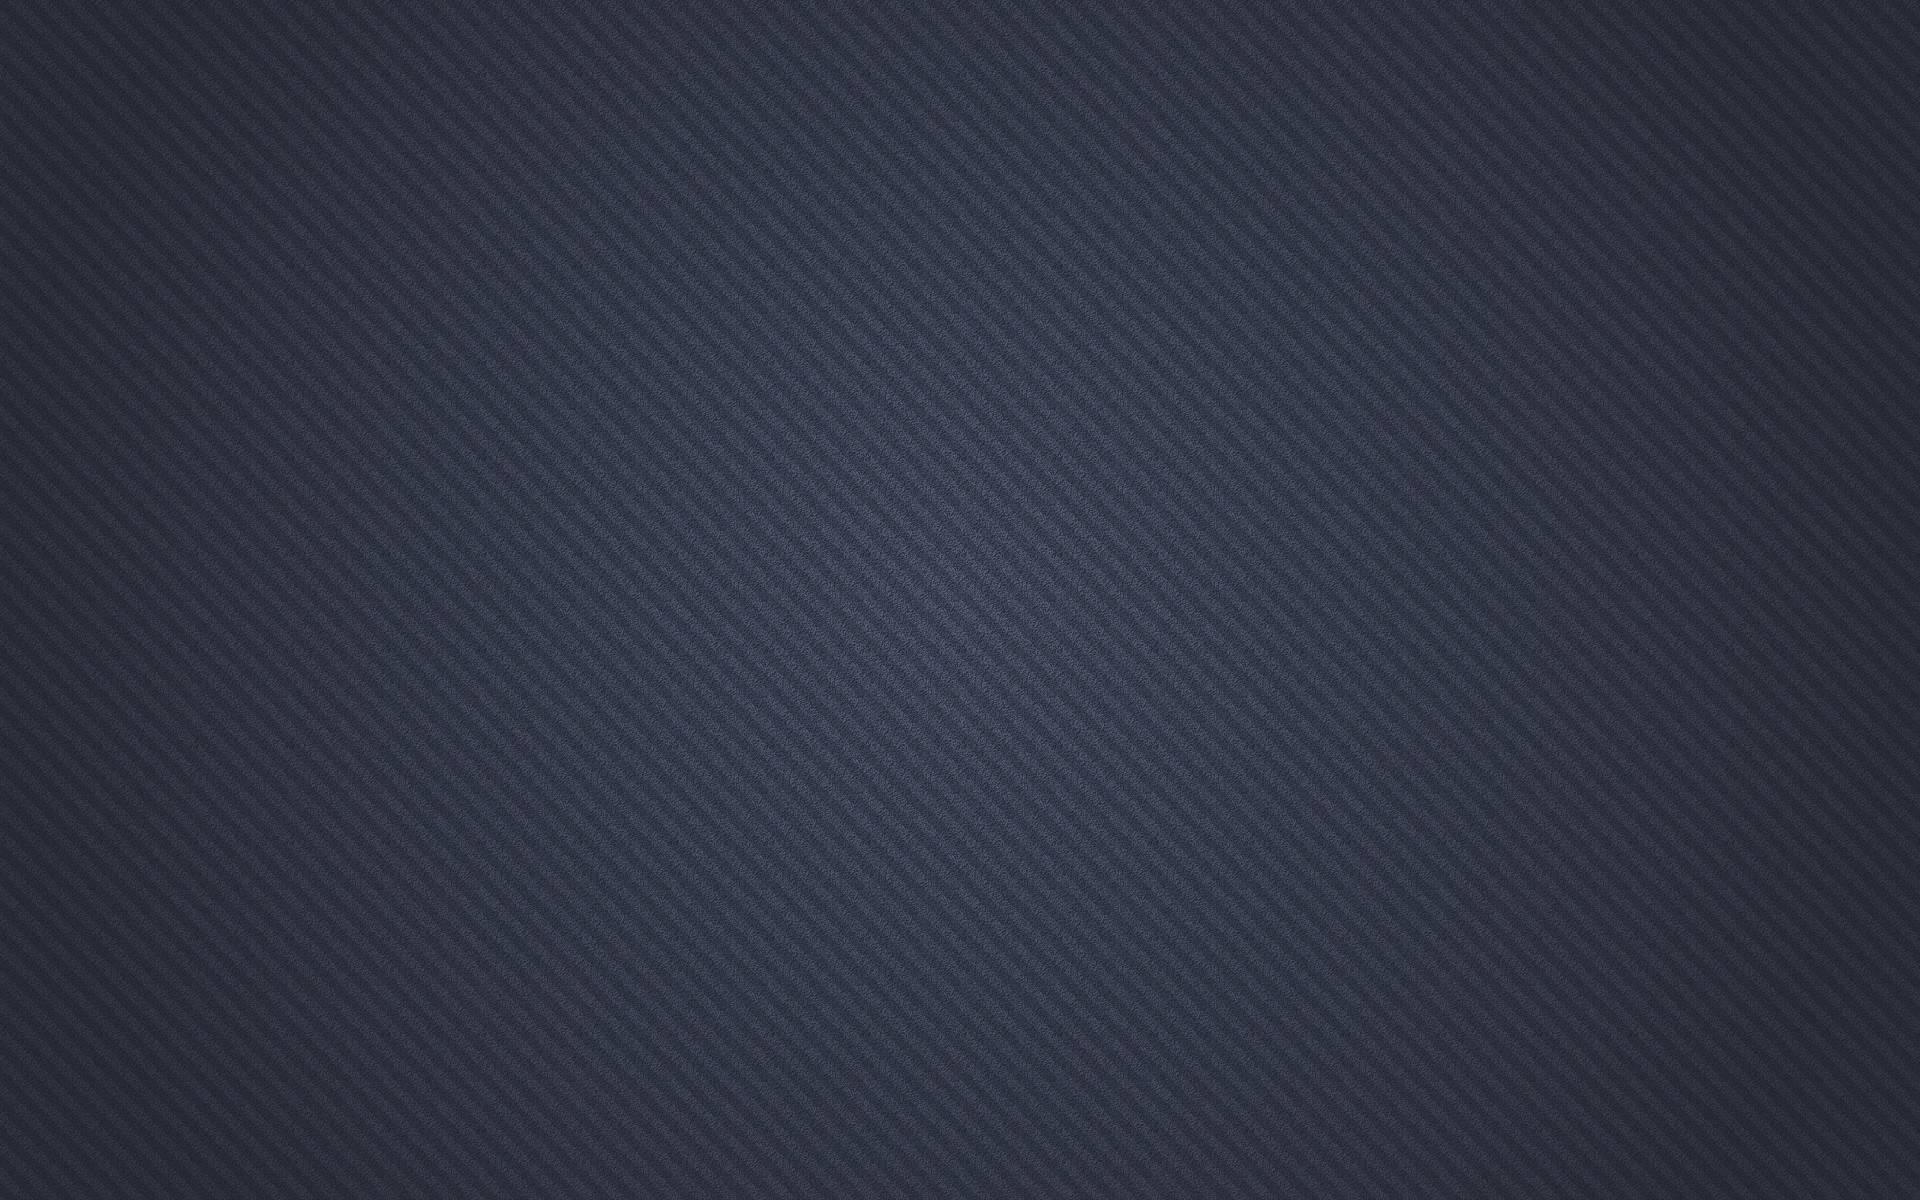 Minimalistic background wallpaper - High Quality and other